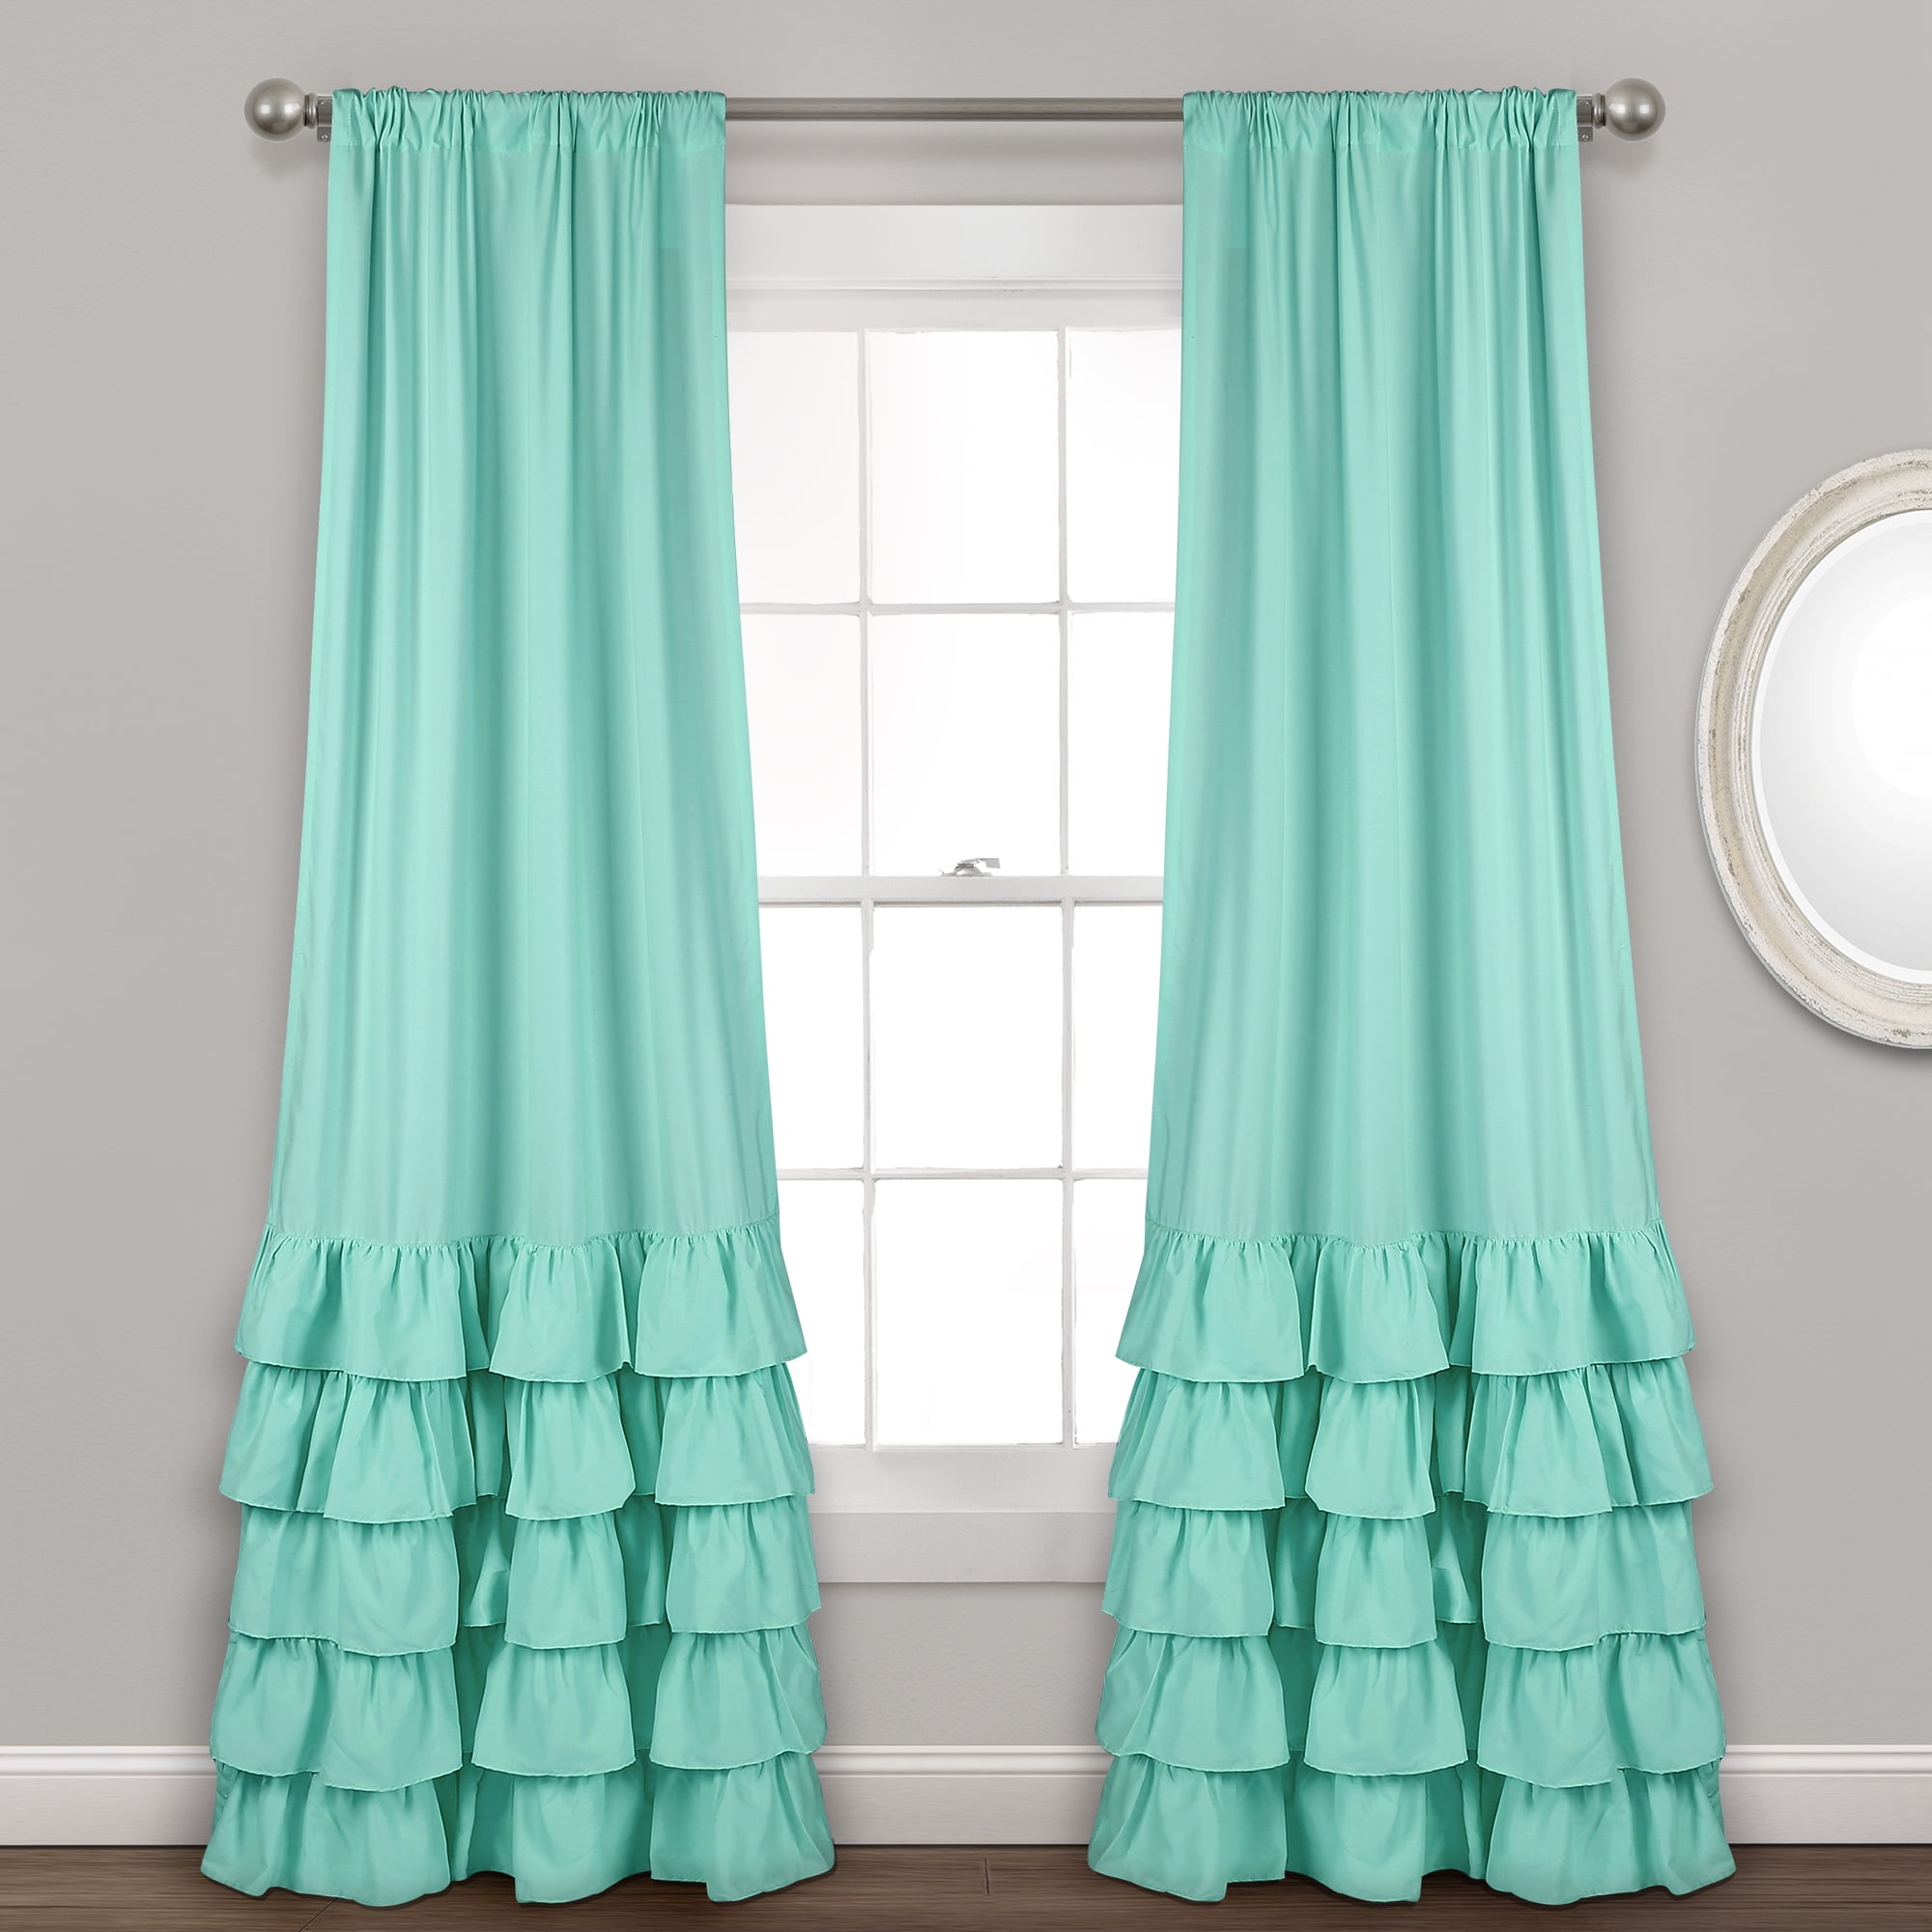 PANEL MULTI RUFFLE DOOR & WINDOW CURTAINS TOP ROD POCKET ALL SIZE & COLORS 2 